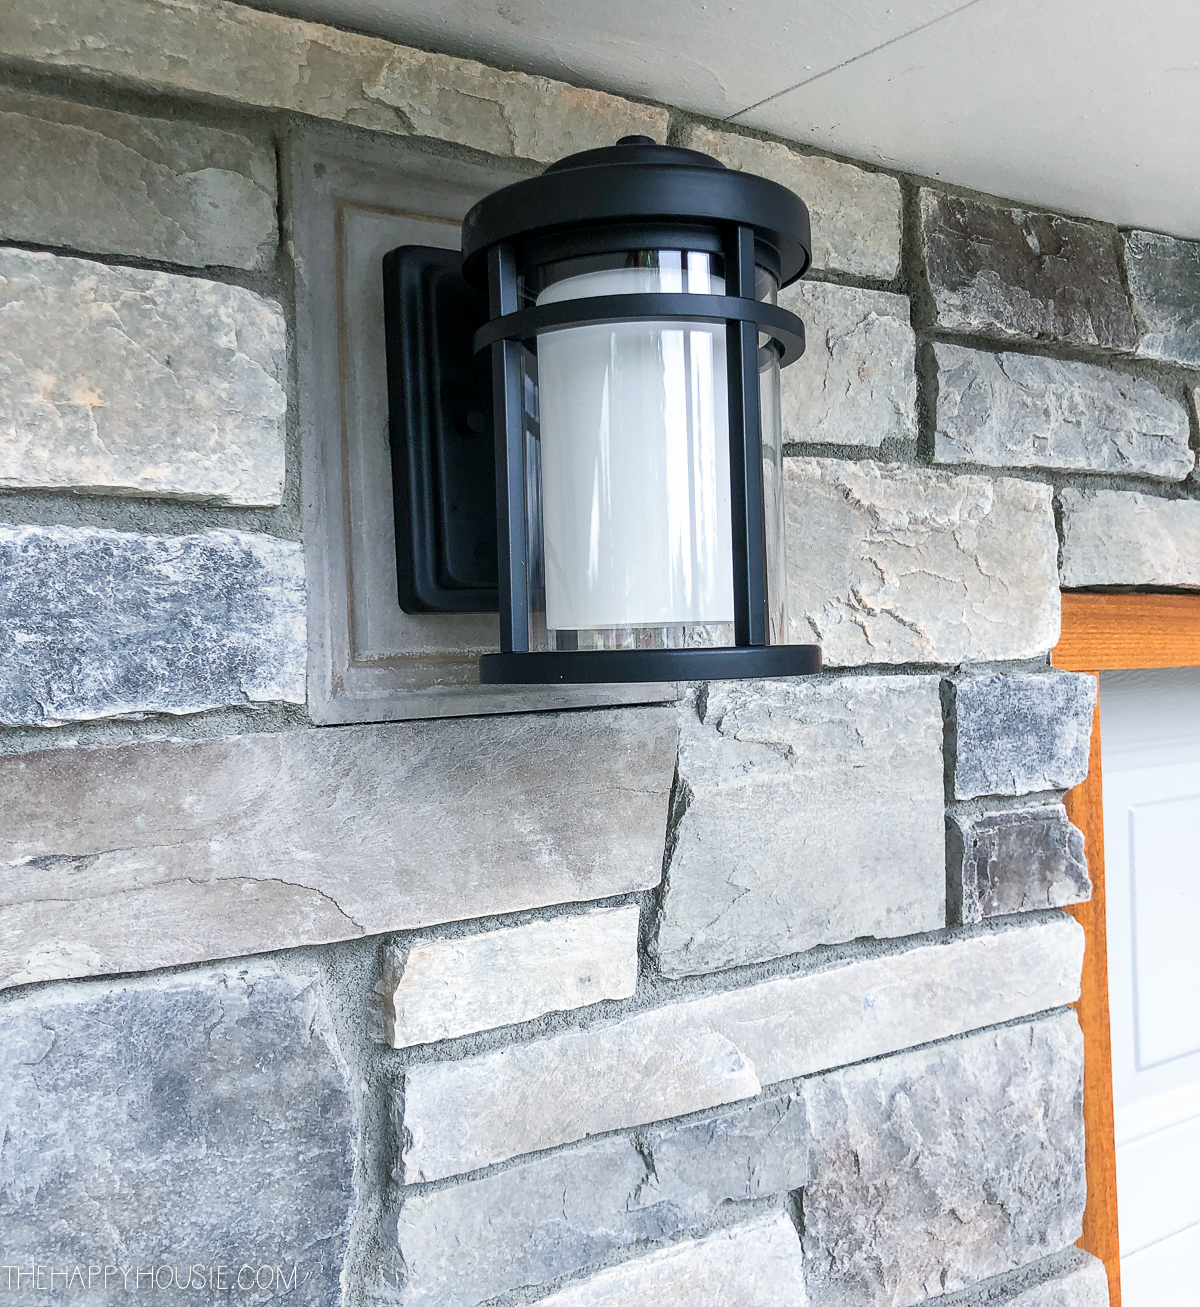 A small black light hanging on the cultured stone of the house.